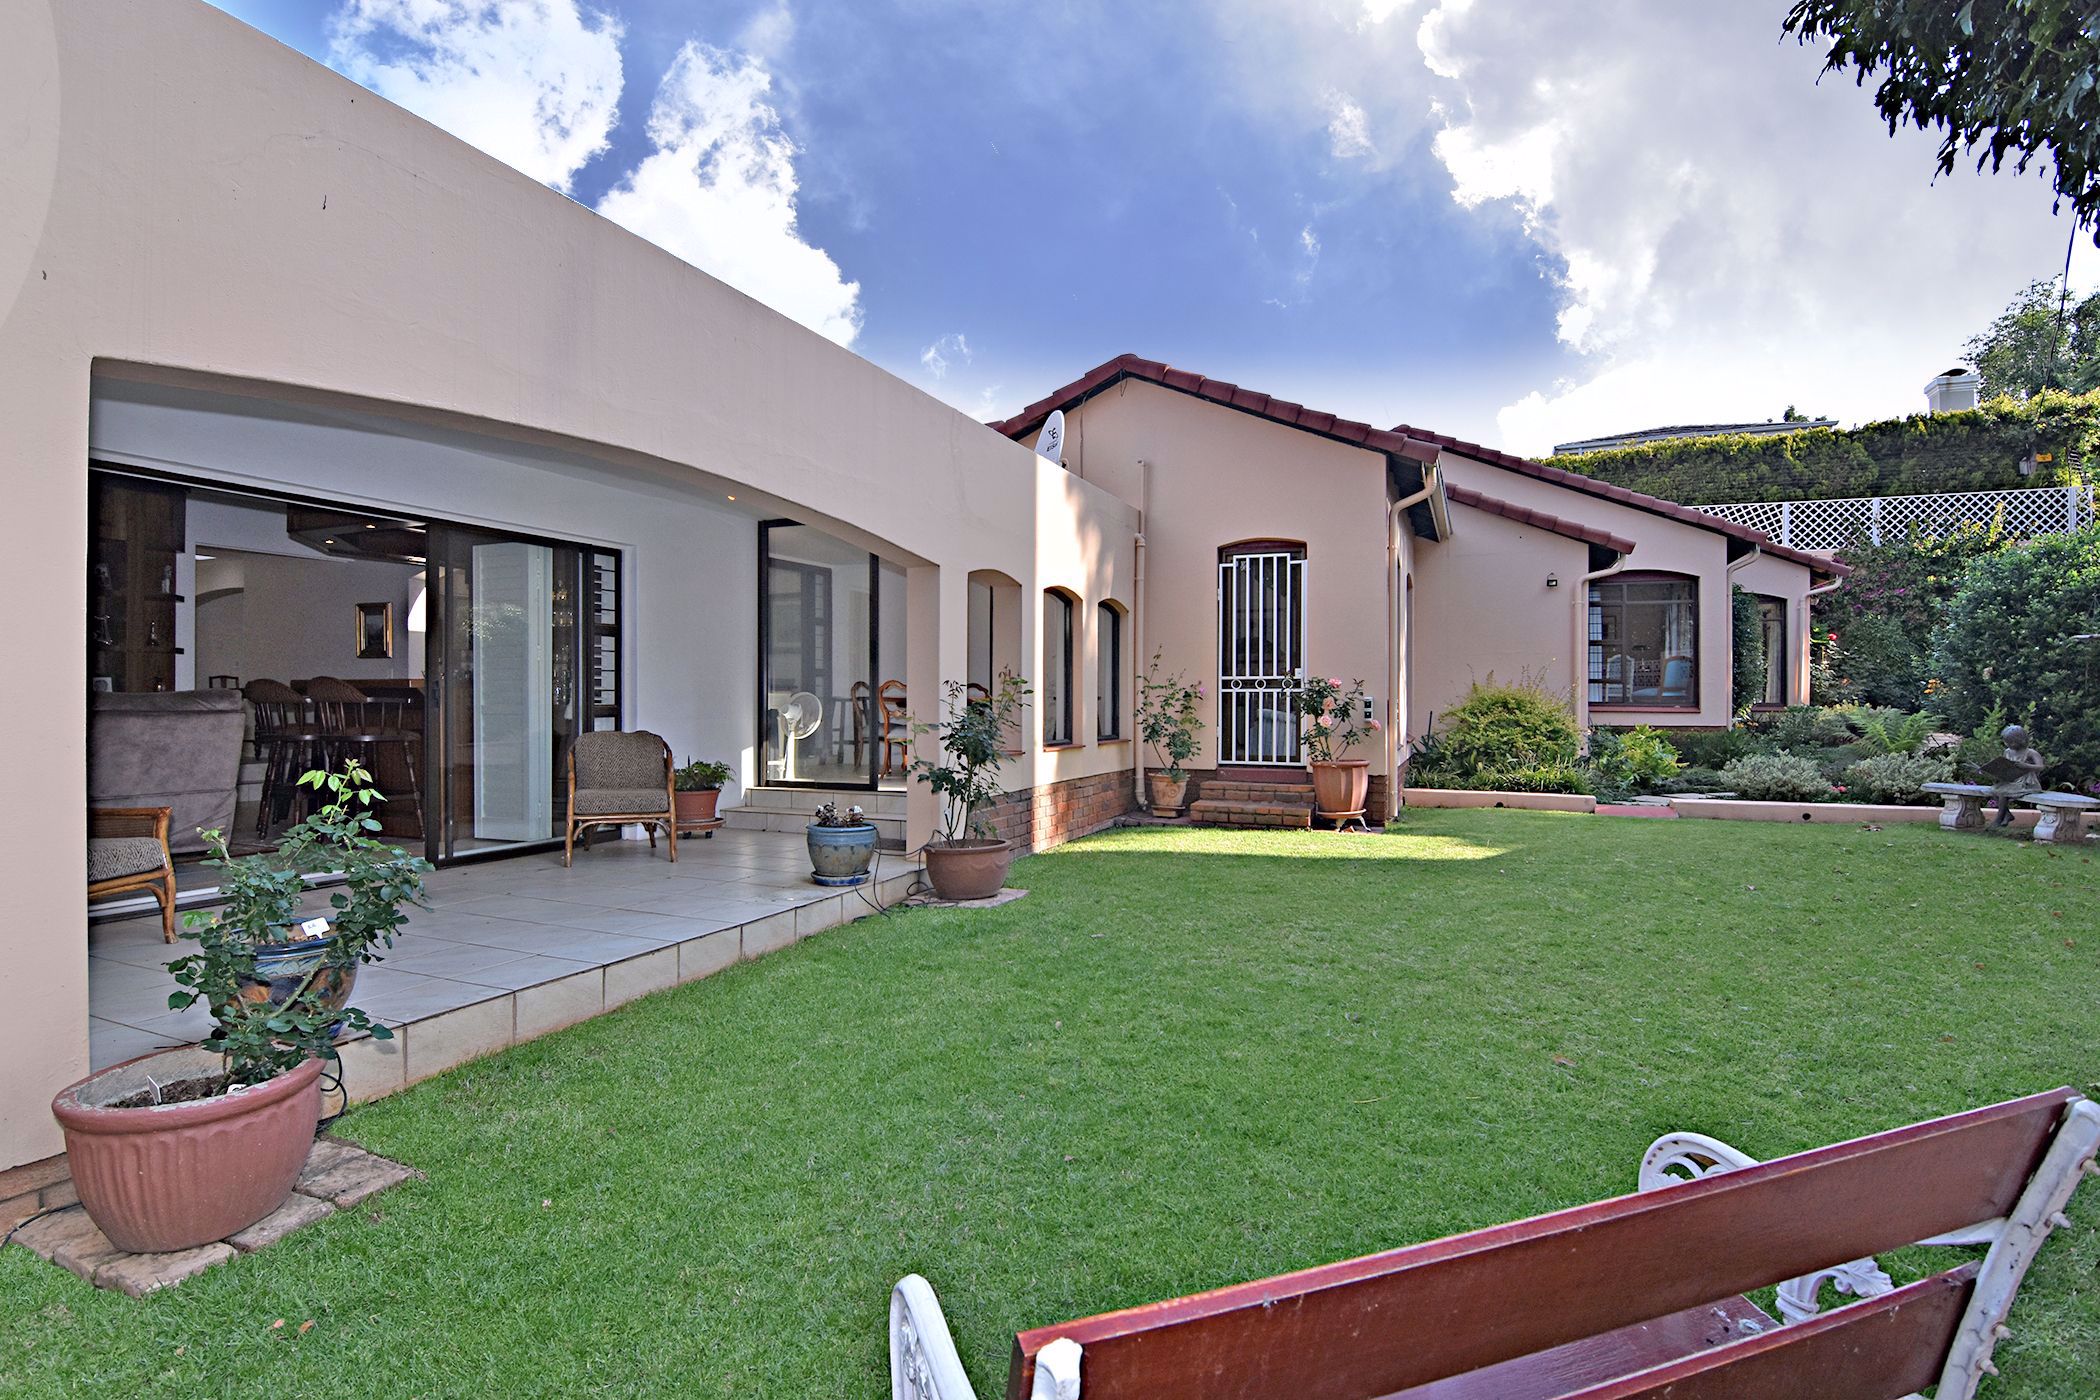 Charming Traditional 3 Bedroom Cluster House For Sale in Hyde Park, Sandton